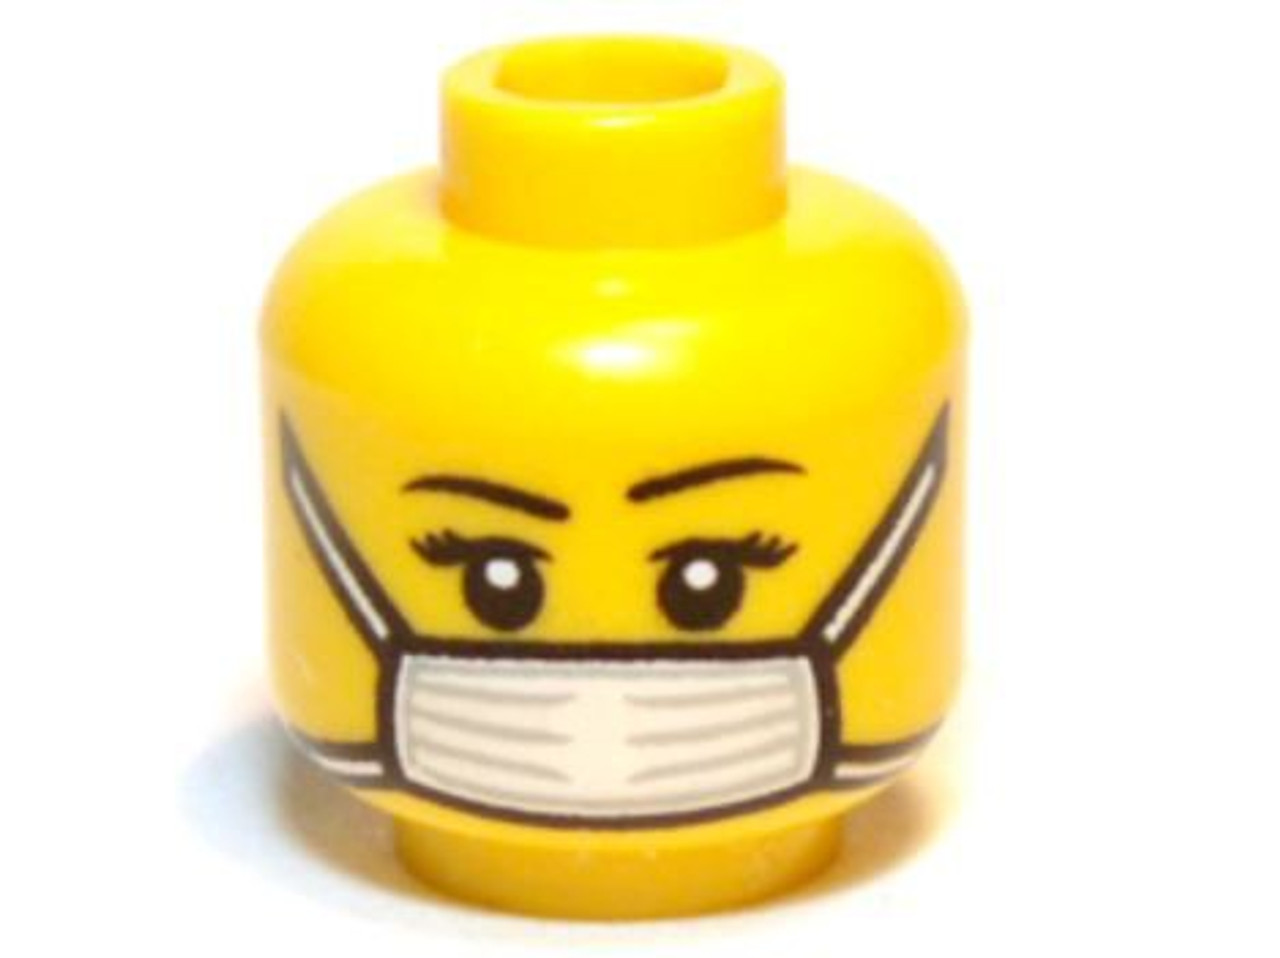 Lego Lego Minifigure Parts Female With White Surgical Mask Minifigure Head Yellow Loose Toywiz - surgeon's roblox face mask